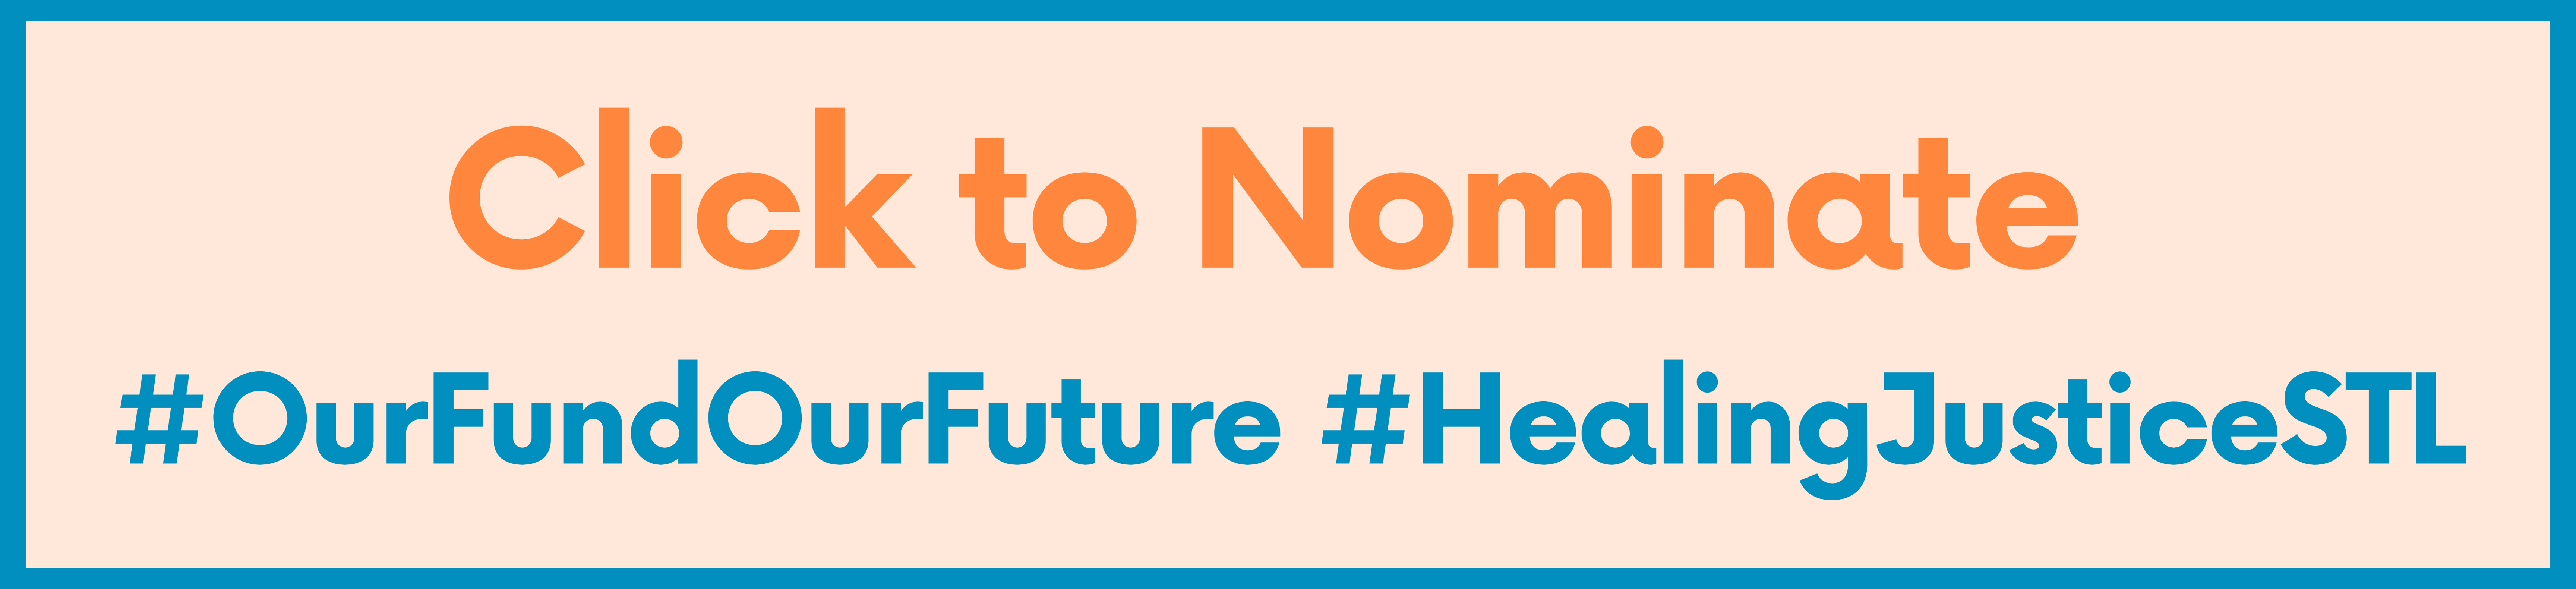 Click to Nominate:#OurFundOurFuture #HealingJusticeSTL